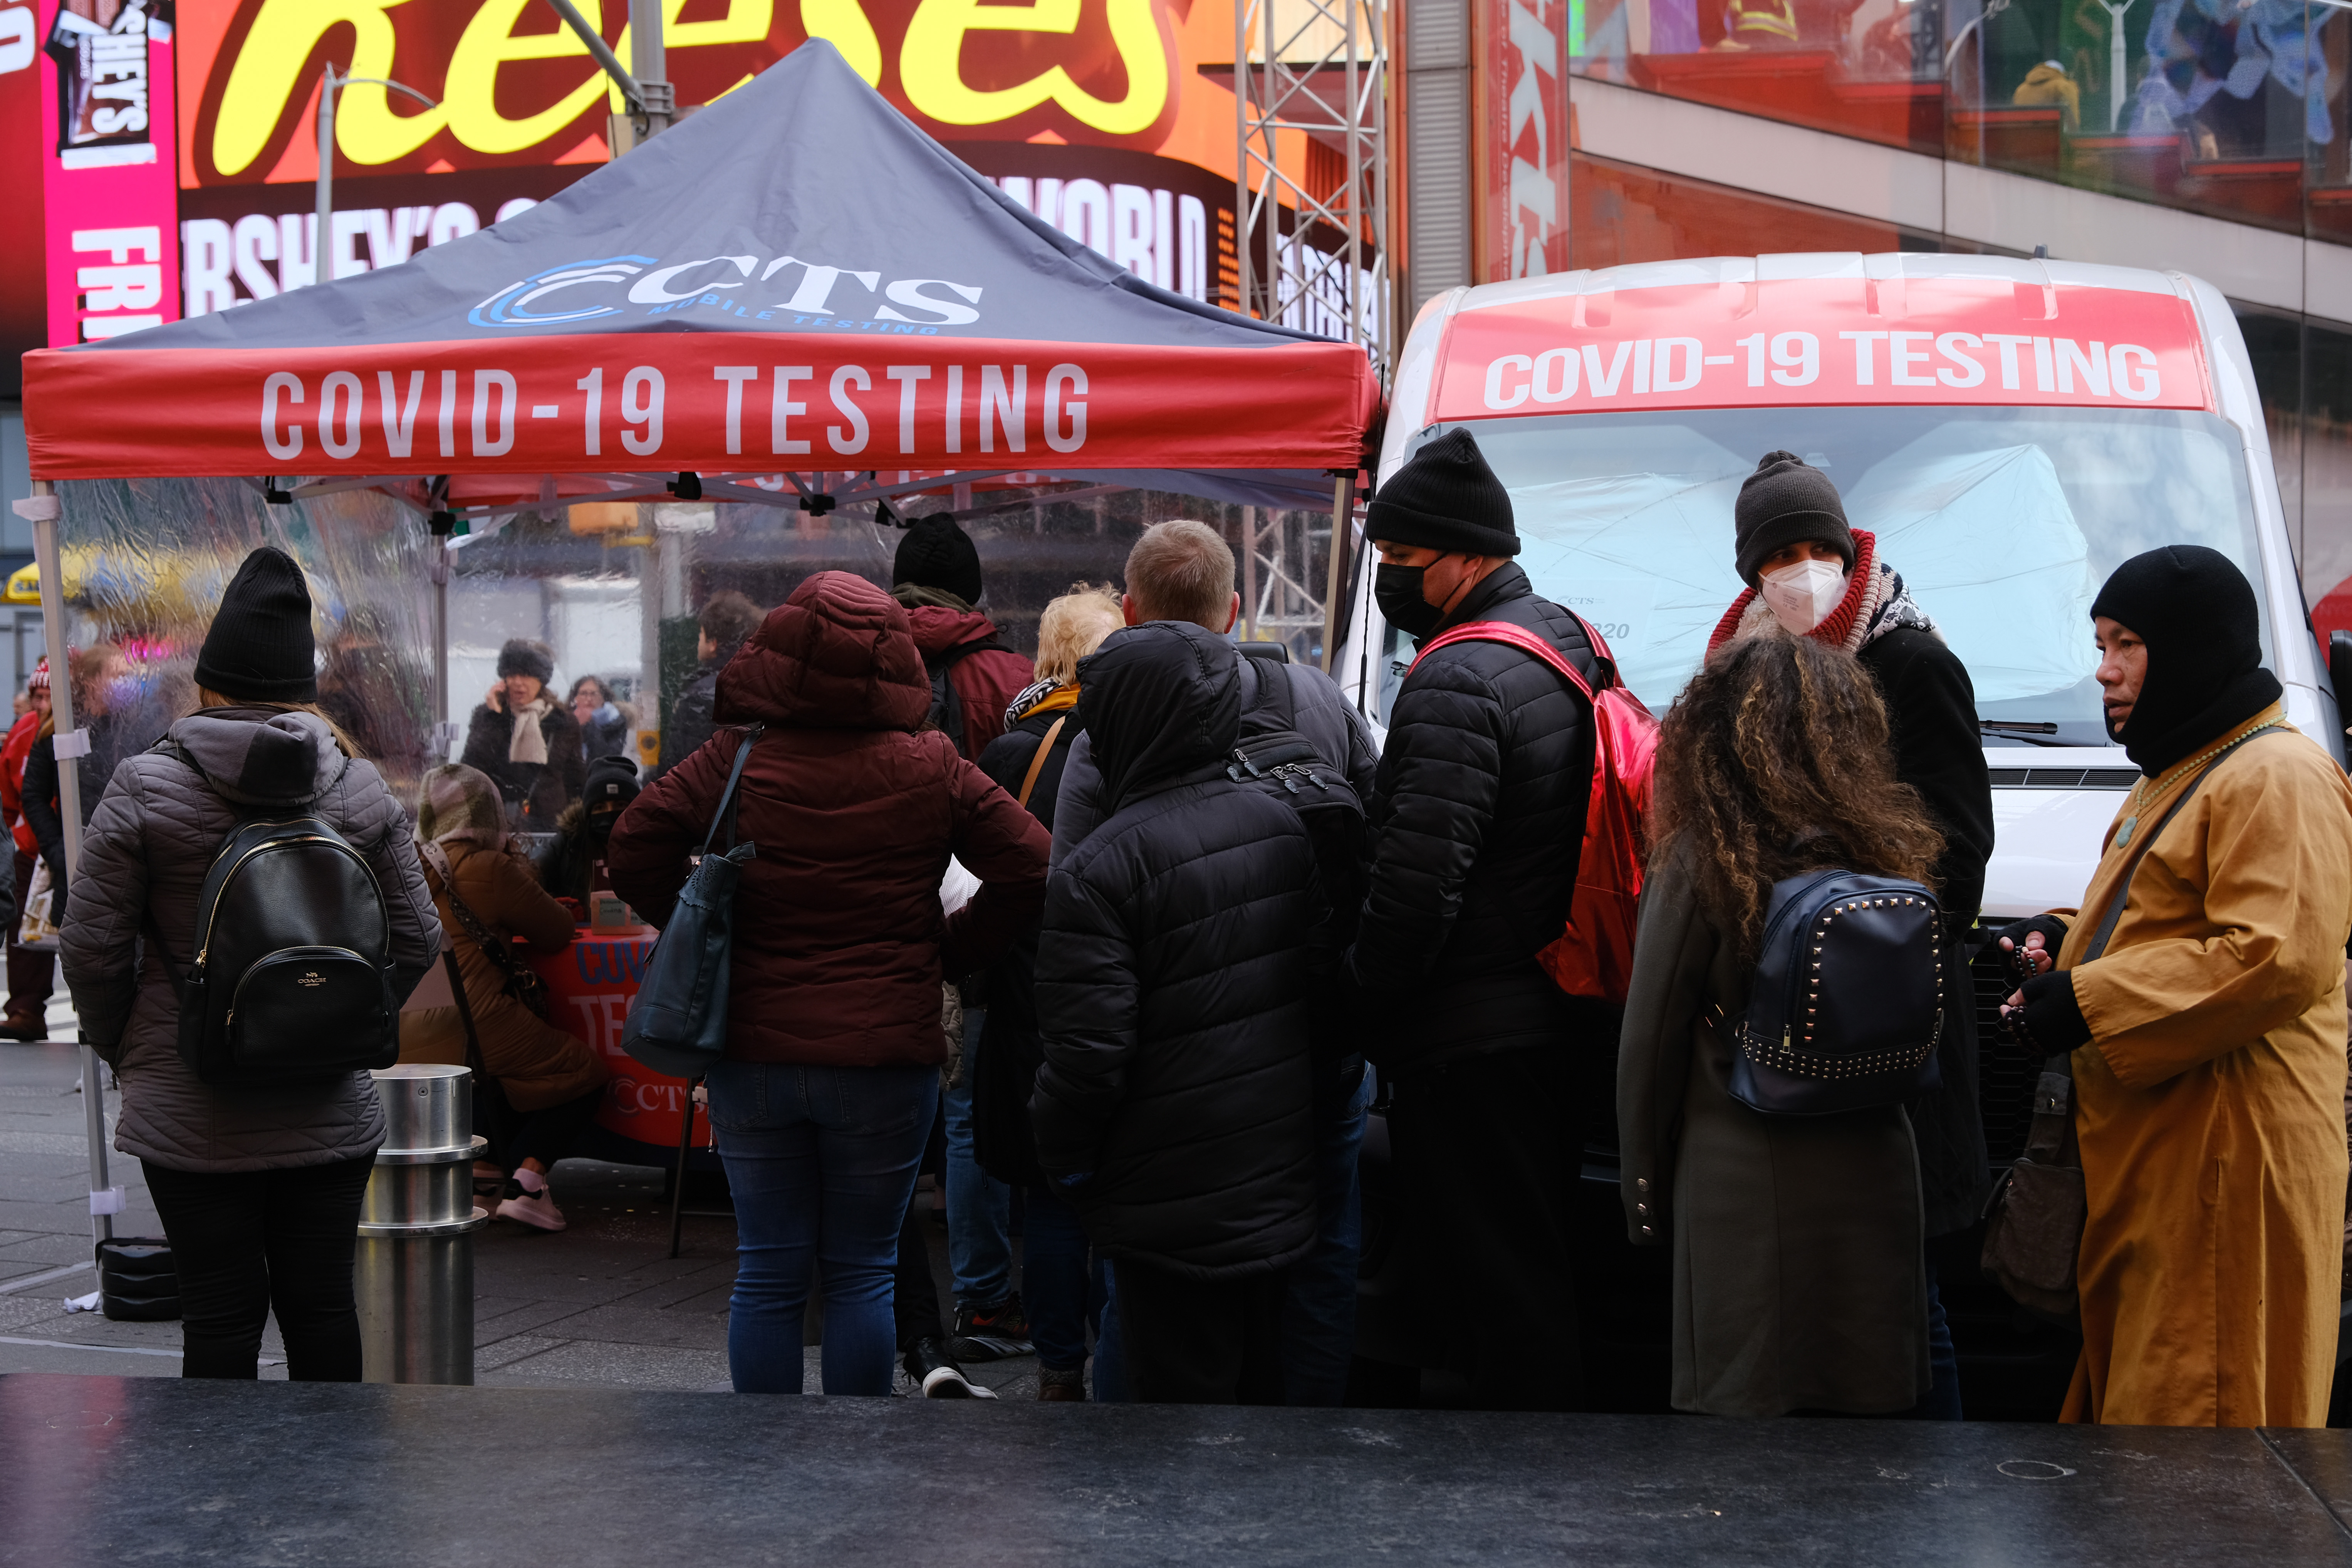 A COVID-19 testing site in Times Square